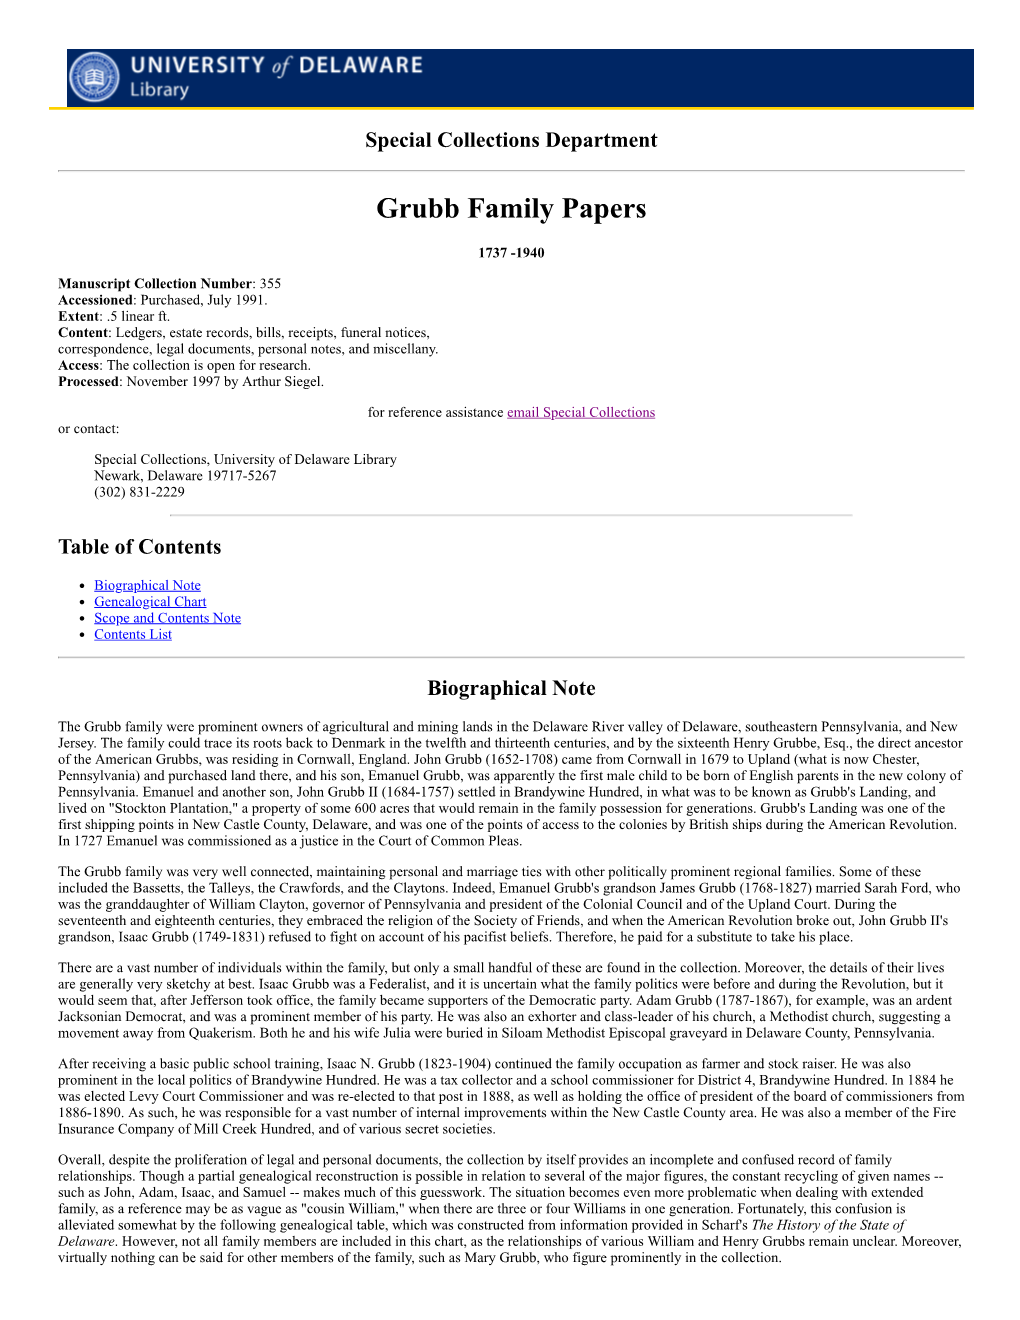 Grubb Family Papers